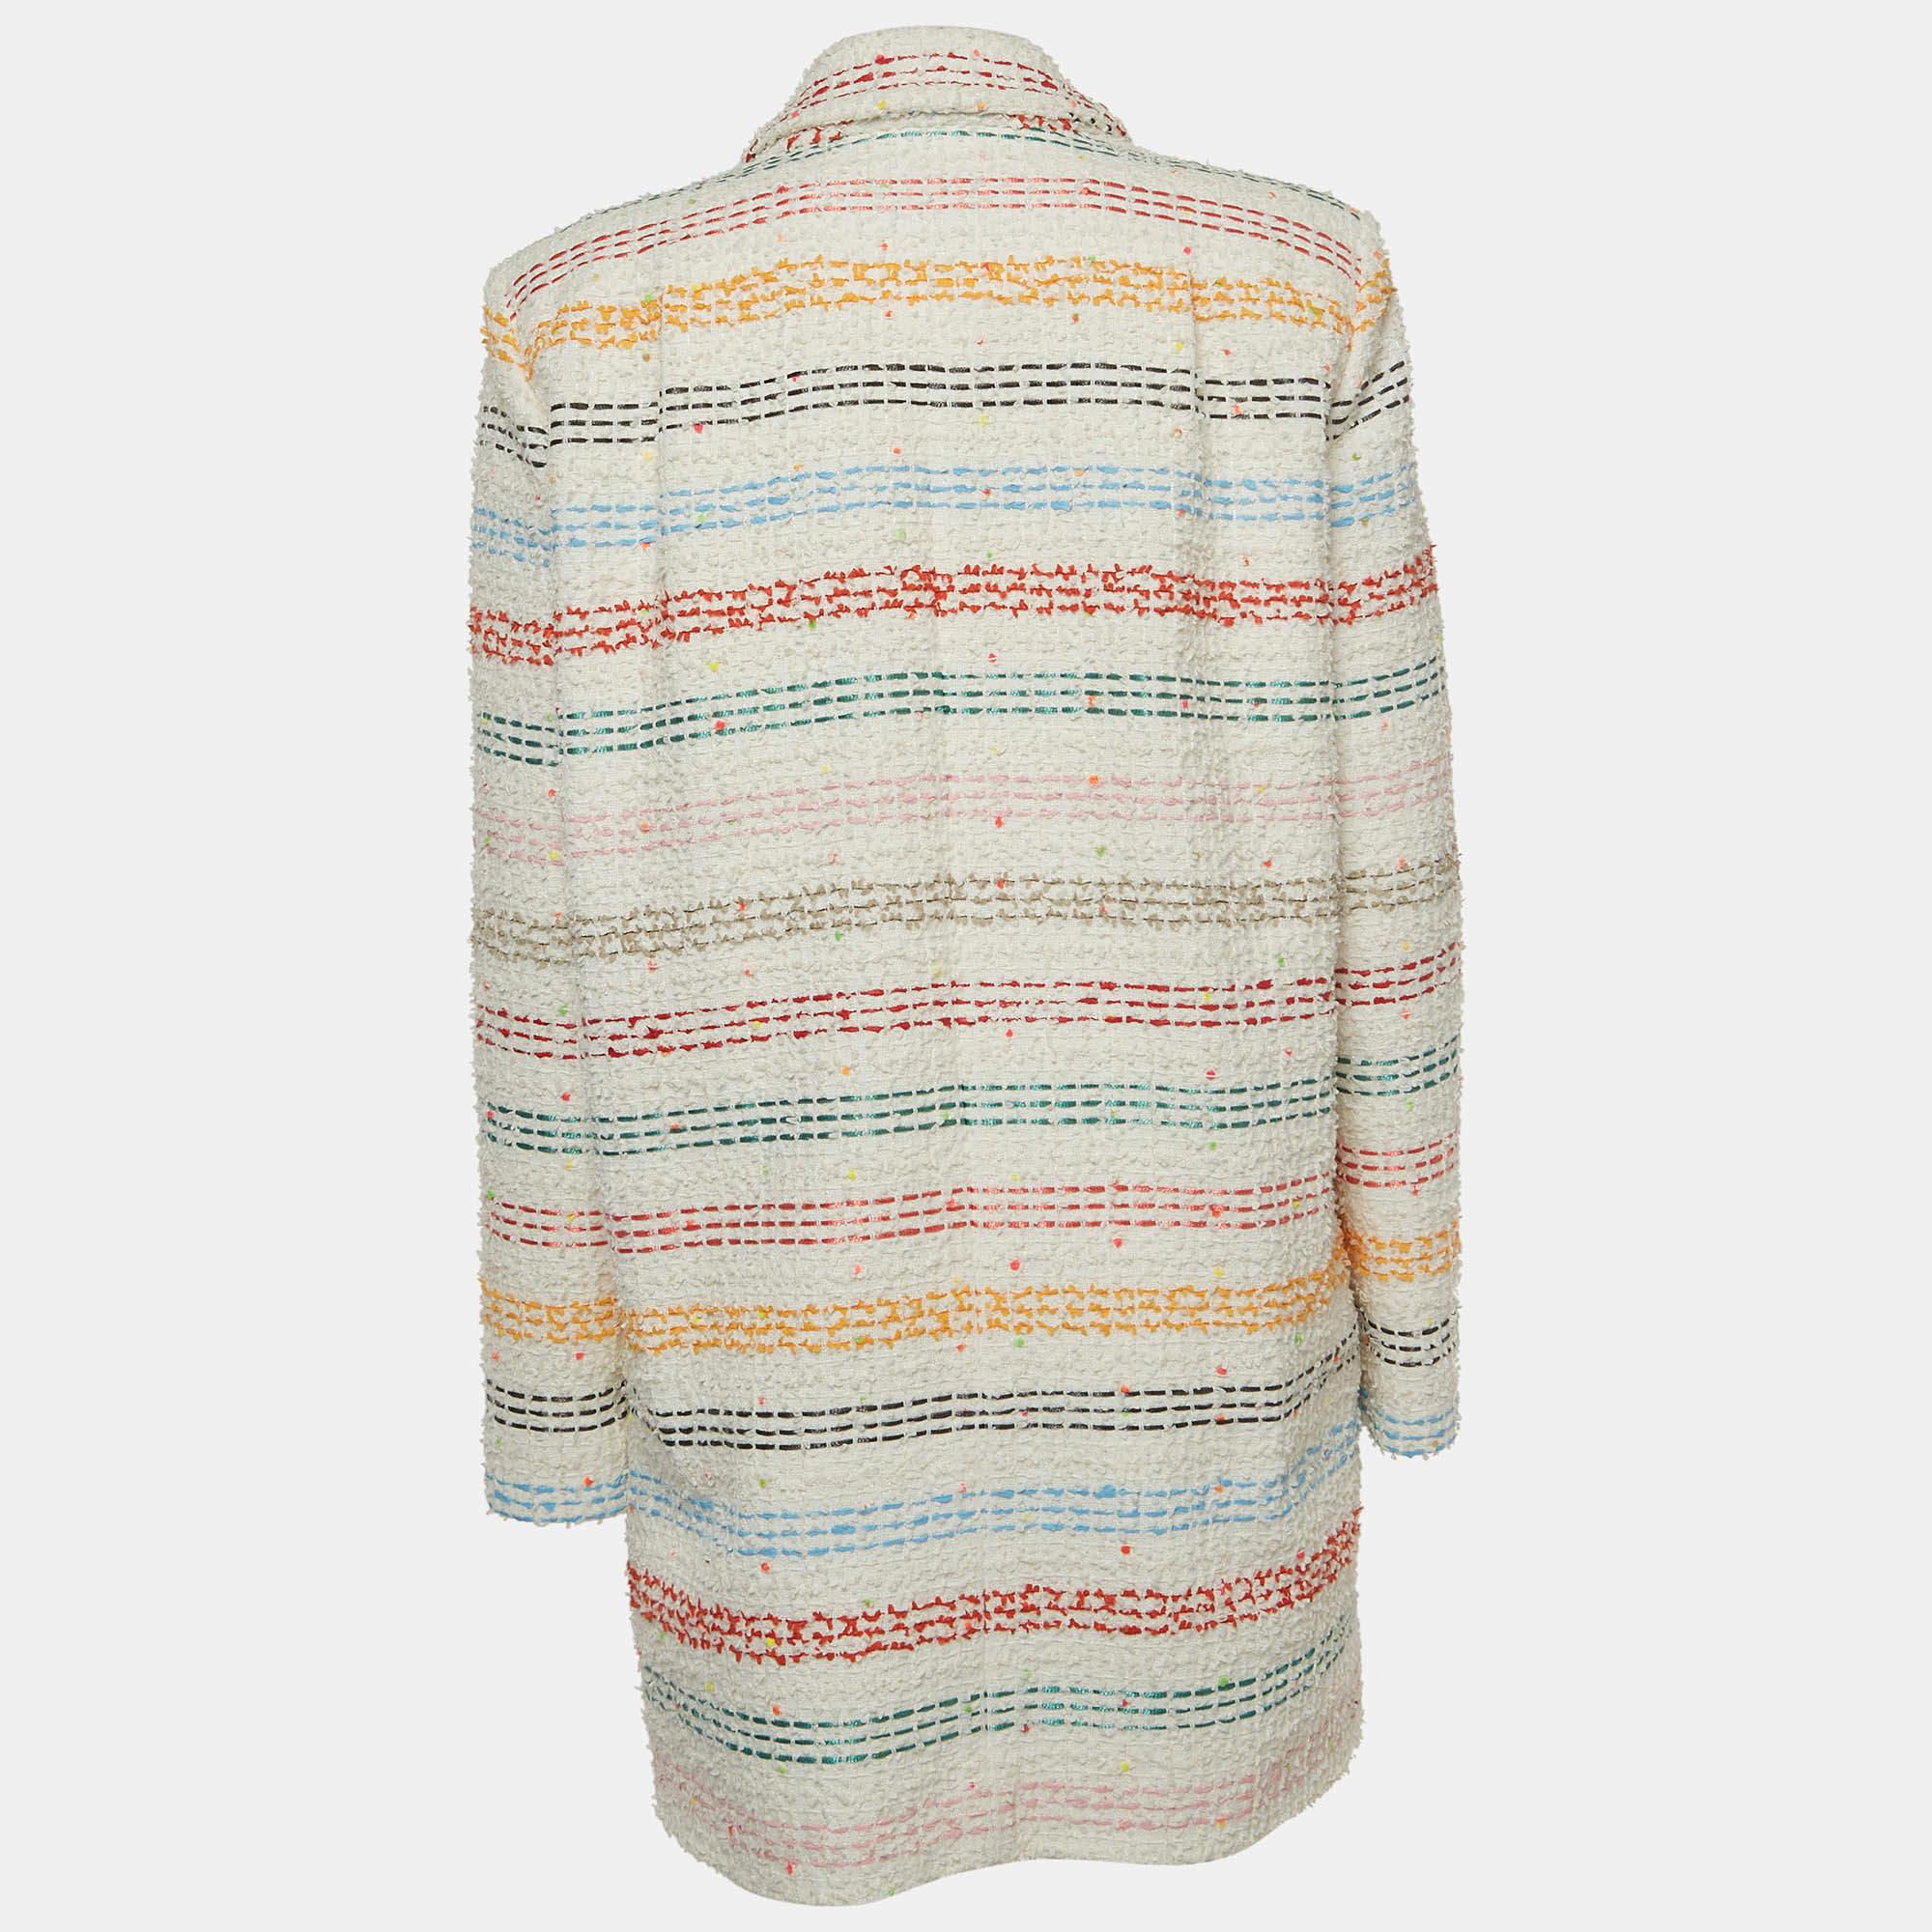 The Chanel jacket is a luxurious fashion statement. Crafted from high-quality tweed fabric, it features multicolor stripe design and two external pockets. With its iconic Chanel design, this jacket exudes elegance and sophistication.

